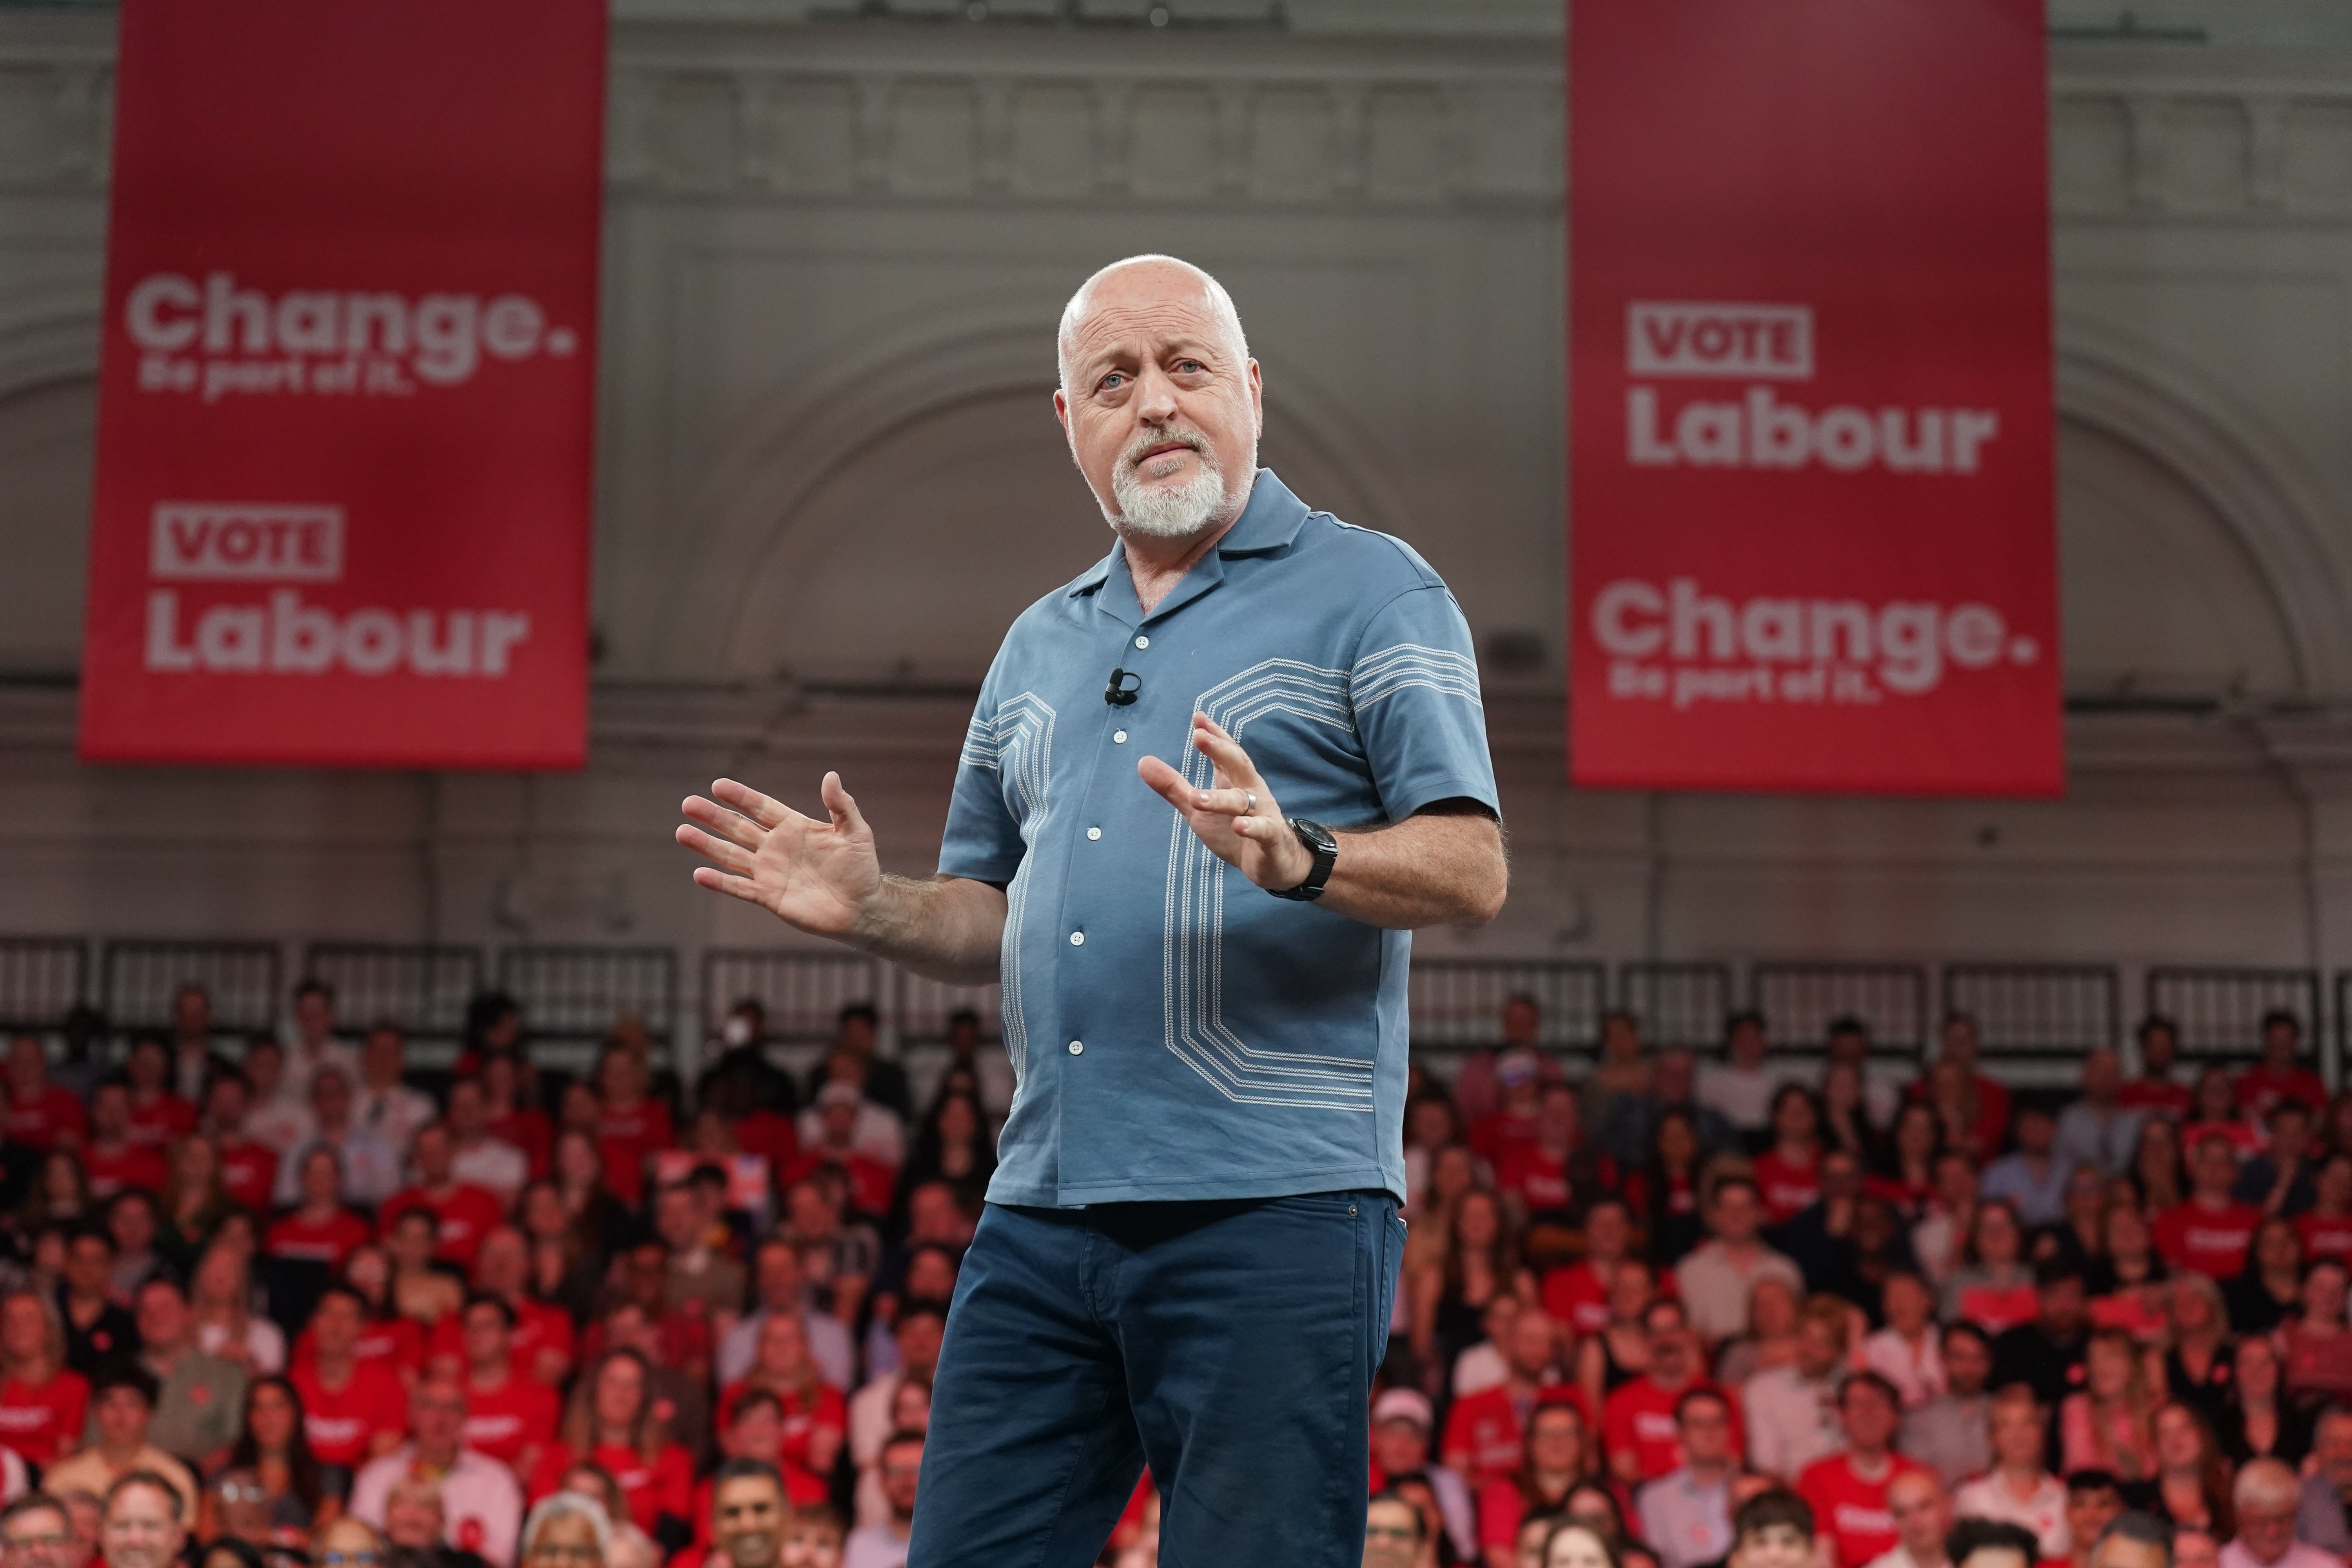 Musician and comedian Bill Bailey addressed a Labor rally, during which there were video endorsements from celebrities including Sir Elton John